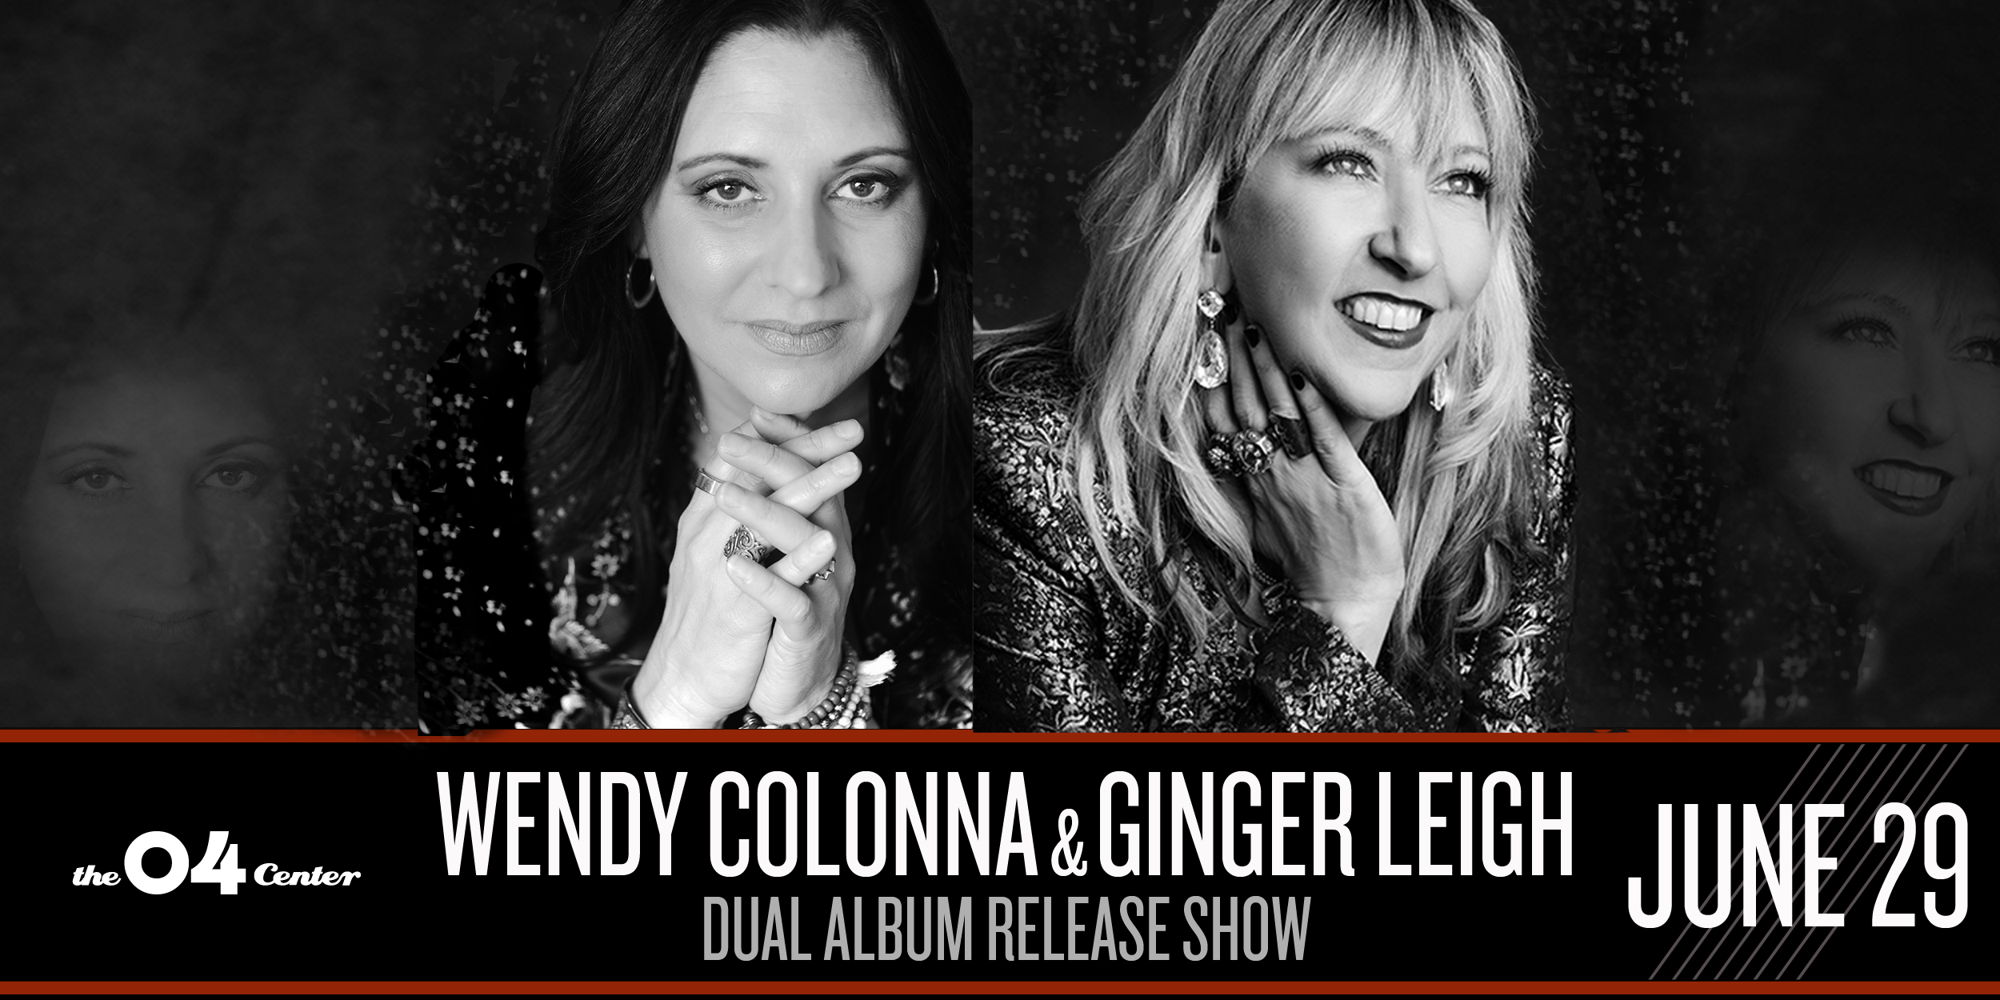  Wendy Colonna & Ginger Leigh // Dual Album Release Show promotional image